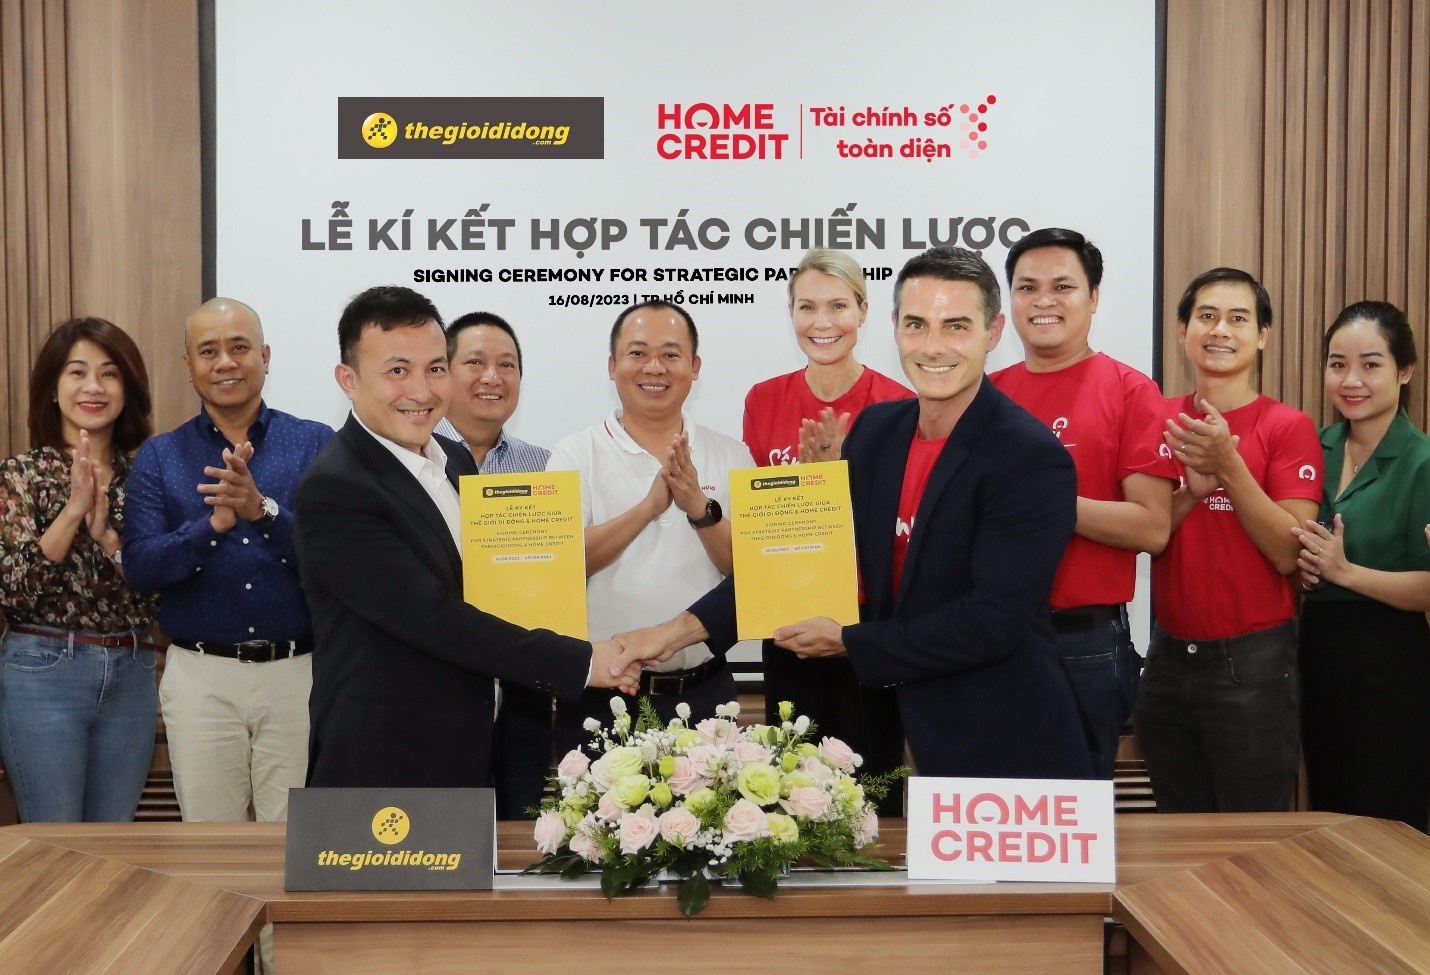 Home Credit signs a strategic partnership with Mobile World